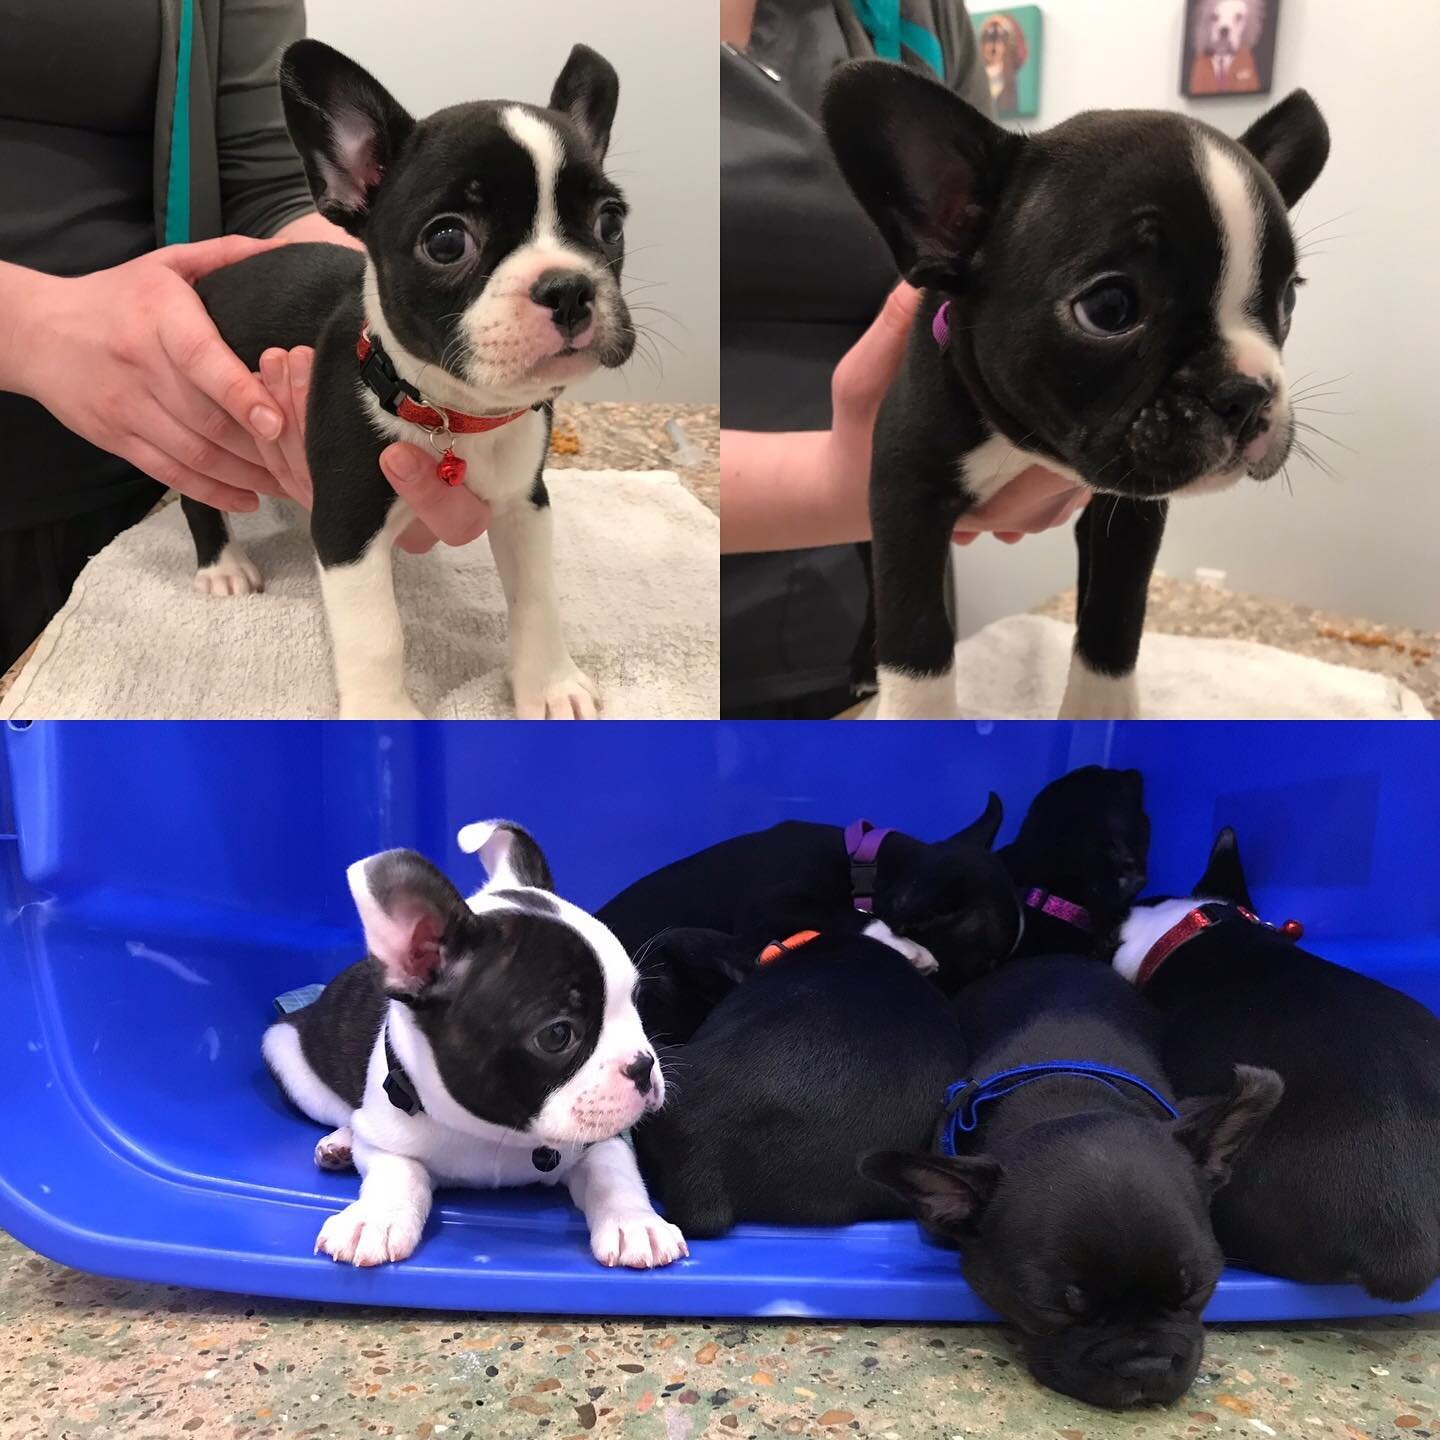 We had 9 smooshies to snuggle and vaccinate today.... Anakin and Mace are at the top, and at the bottom, Hank is keeping watch while his buddies sleep.